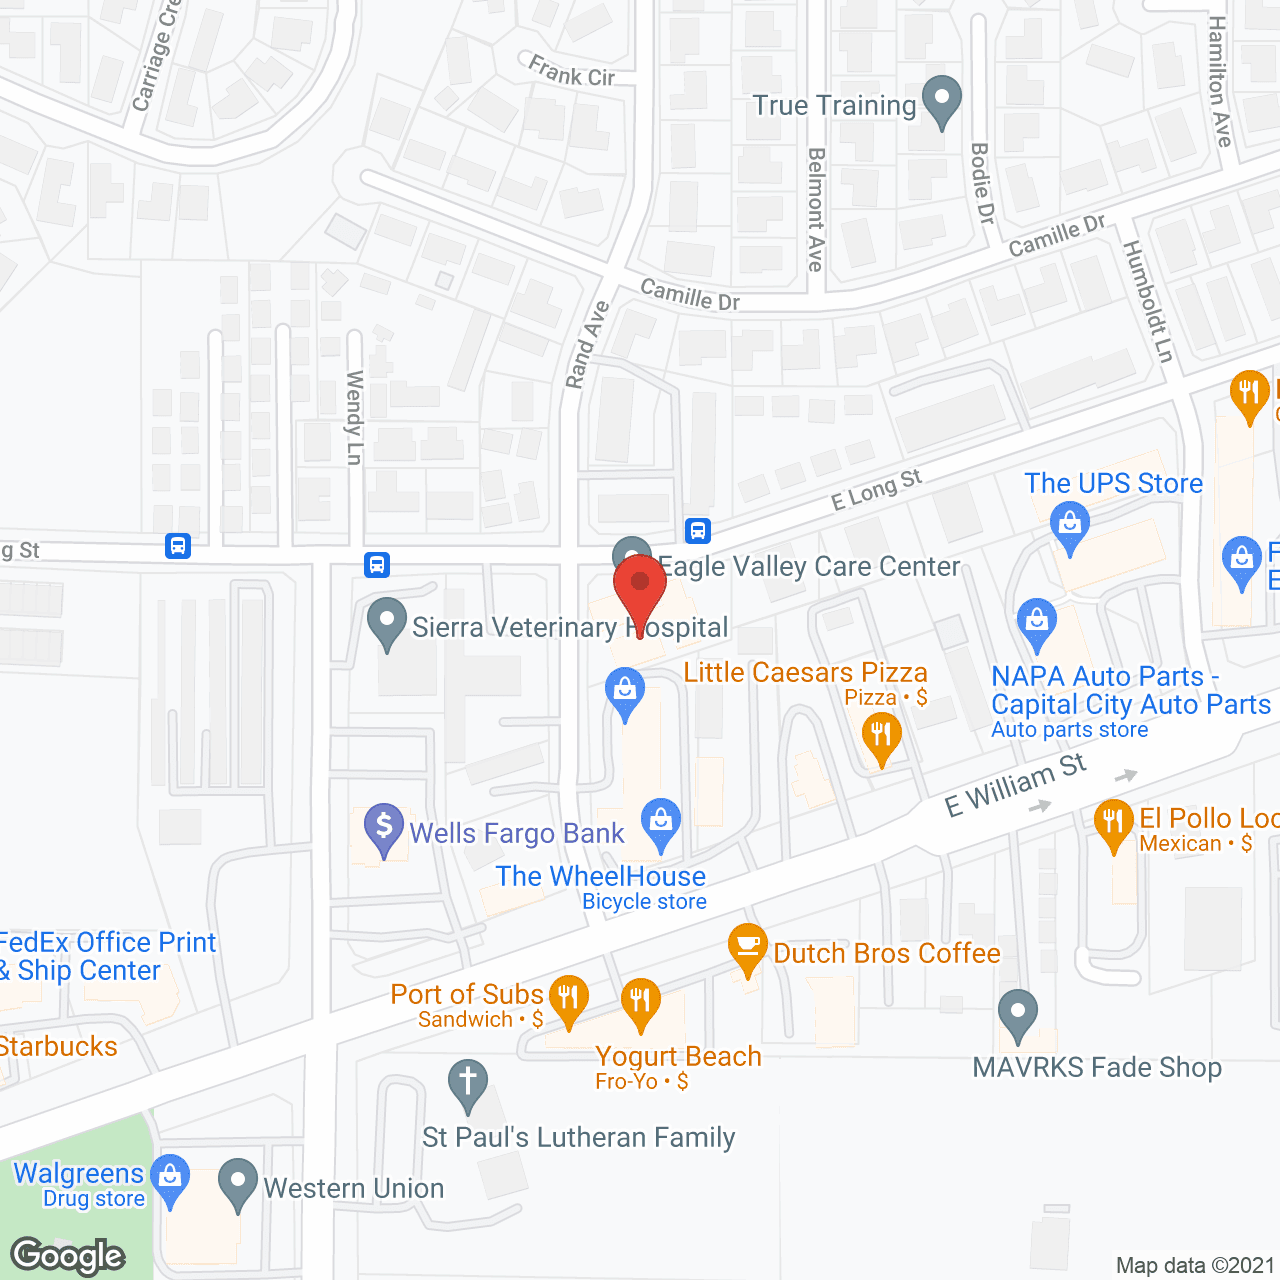 Eagle Valley Care Ctr in google map